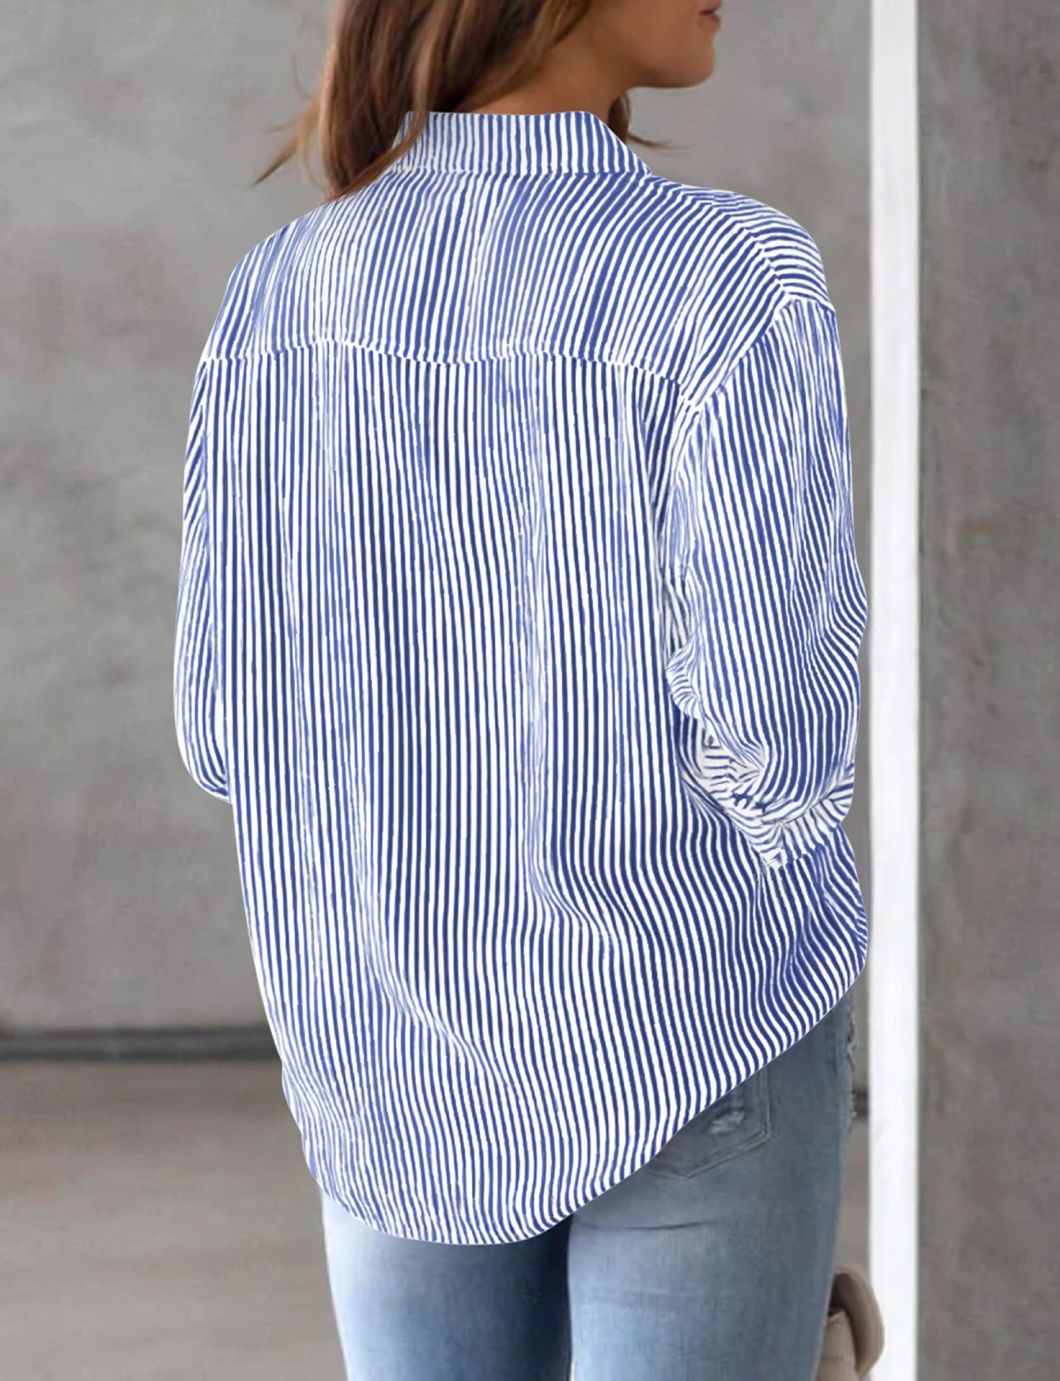 2023 Sale Top Women&prime;s Button-up Shirt Striped Classic Long-Sleeved Office Work Shirt Top